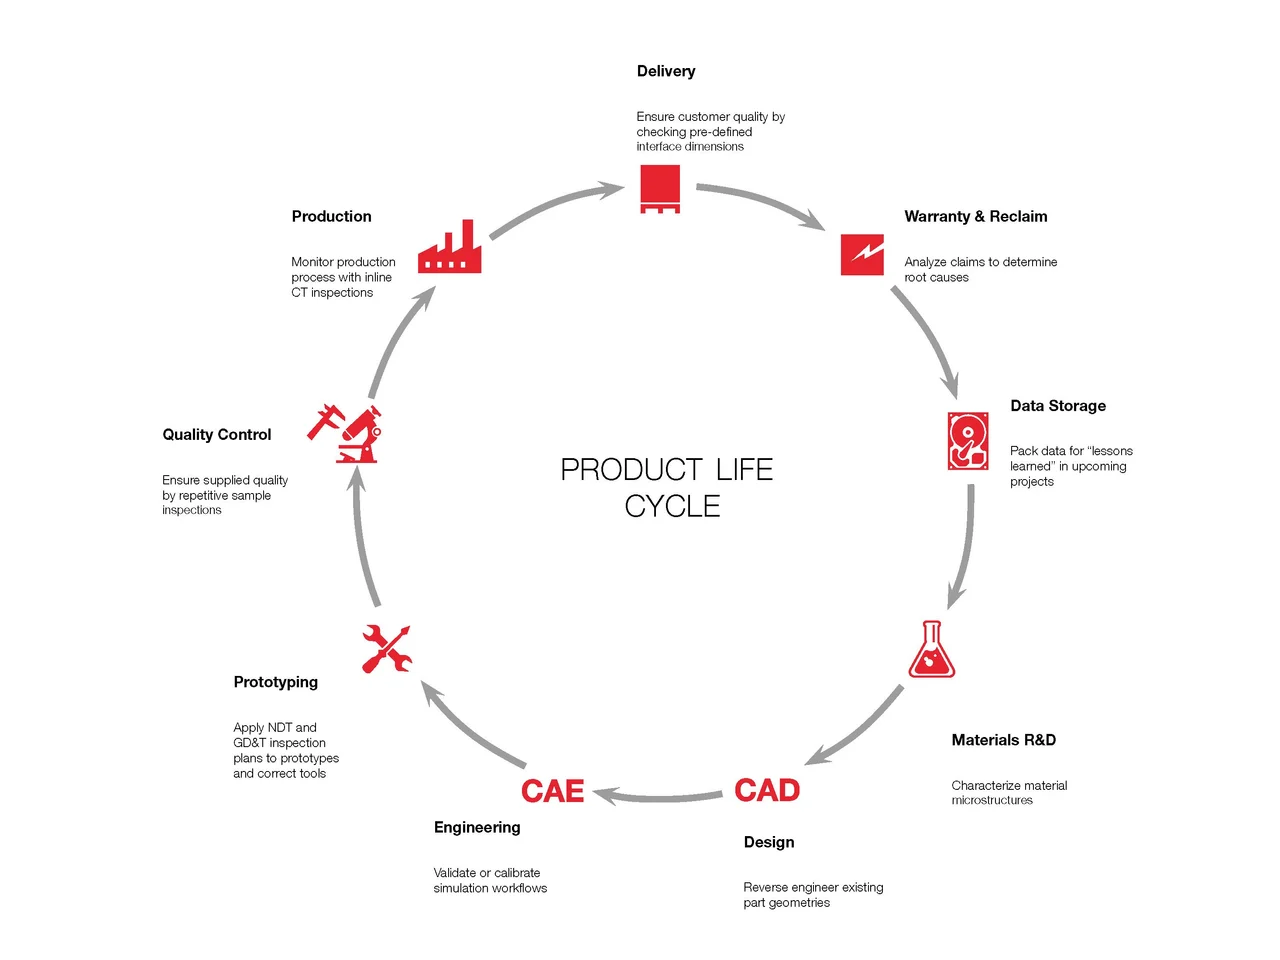 Volume Graphics software in the product life cycle